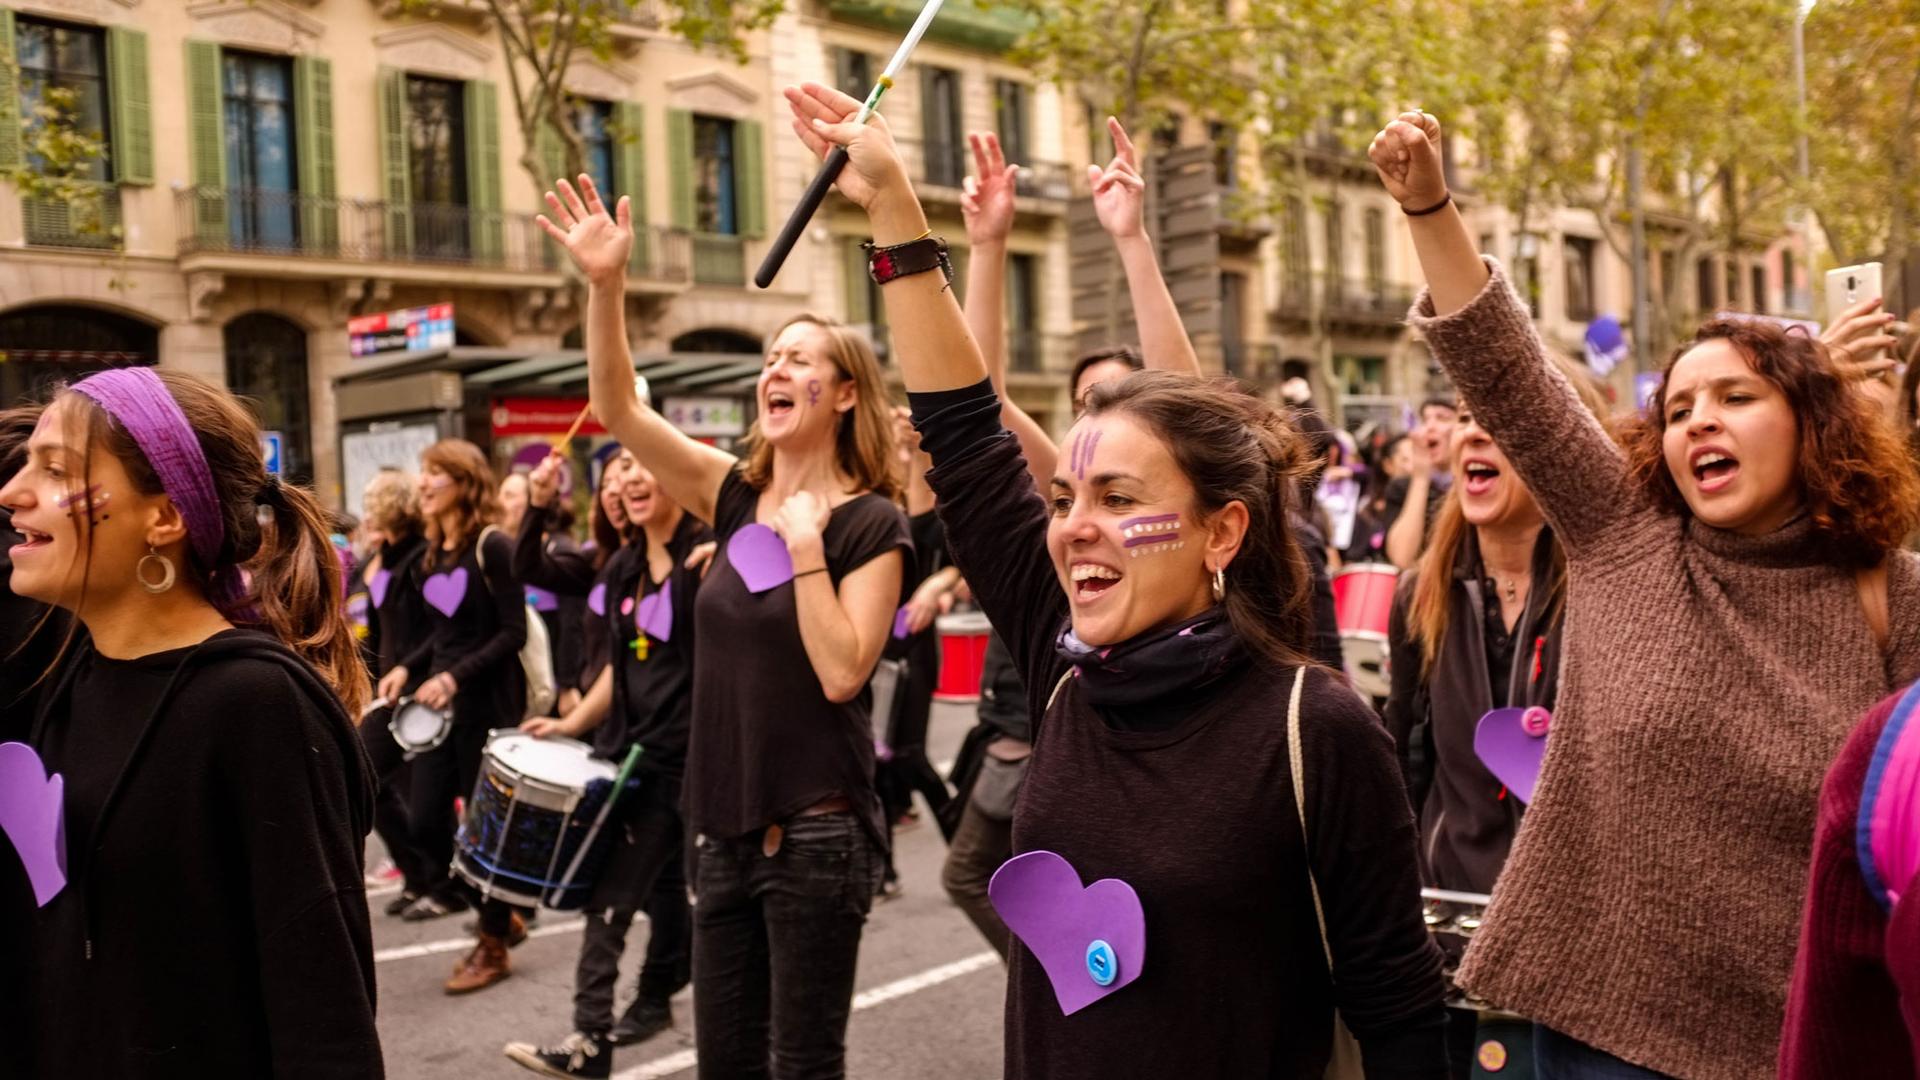 A street is shown filled with many women with arms raised rallying against prostitution.   